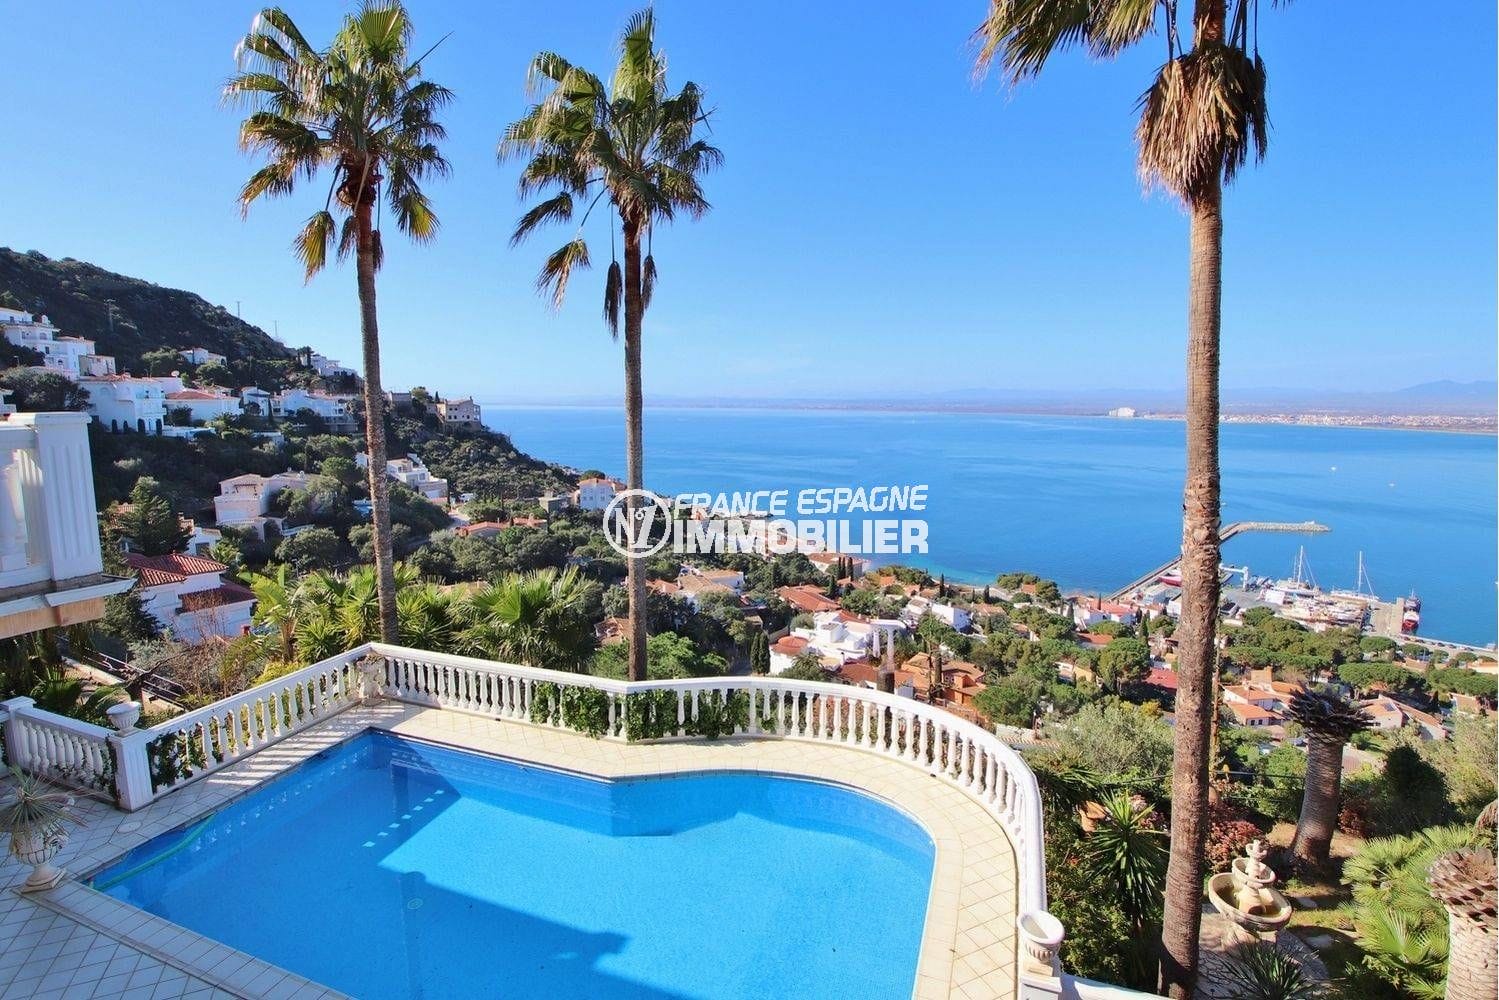 Roses - luxury villa with breathtaking view of the port and bay